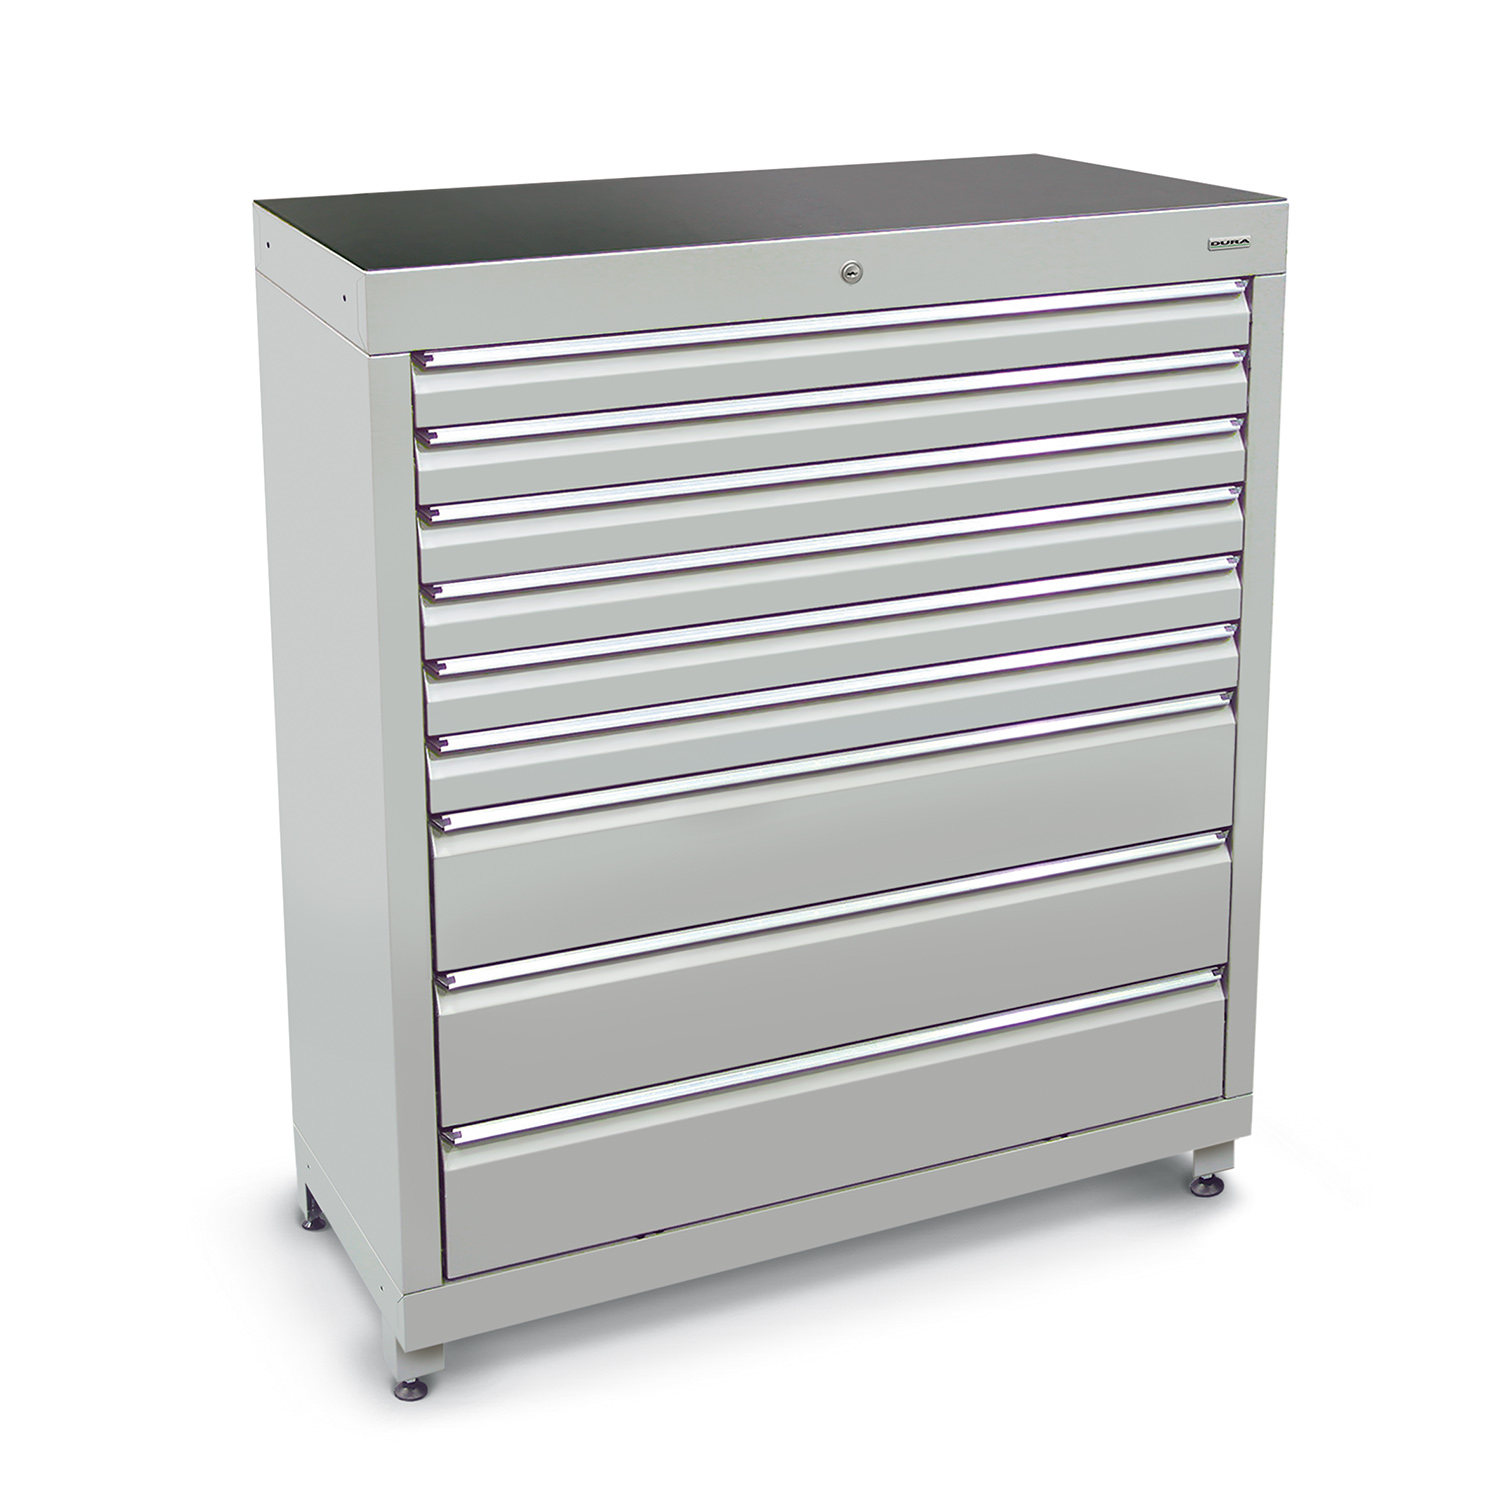 1200mm Multi-drawer high tool cabinets with 9 drawers (6 medium, 3 large) and feet